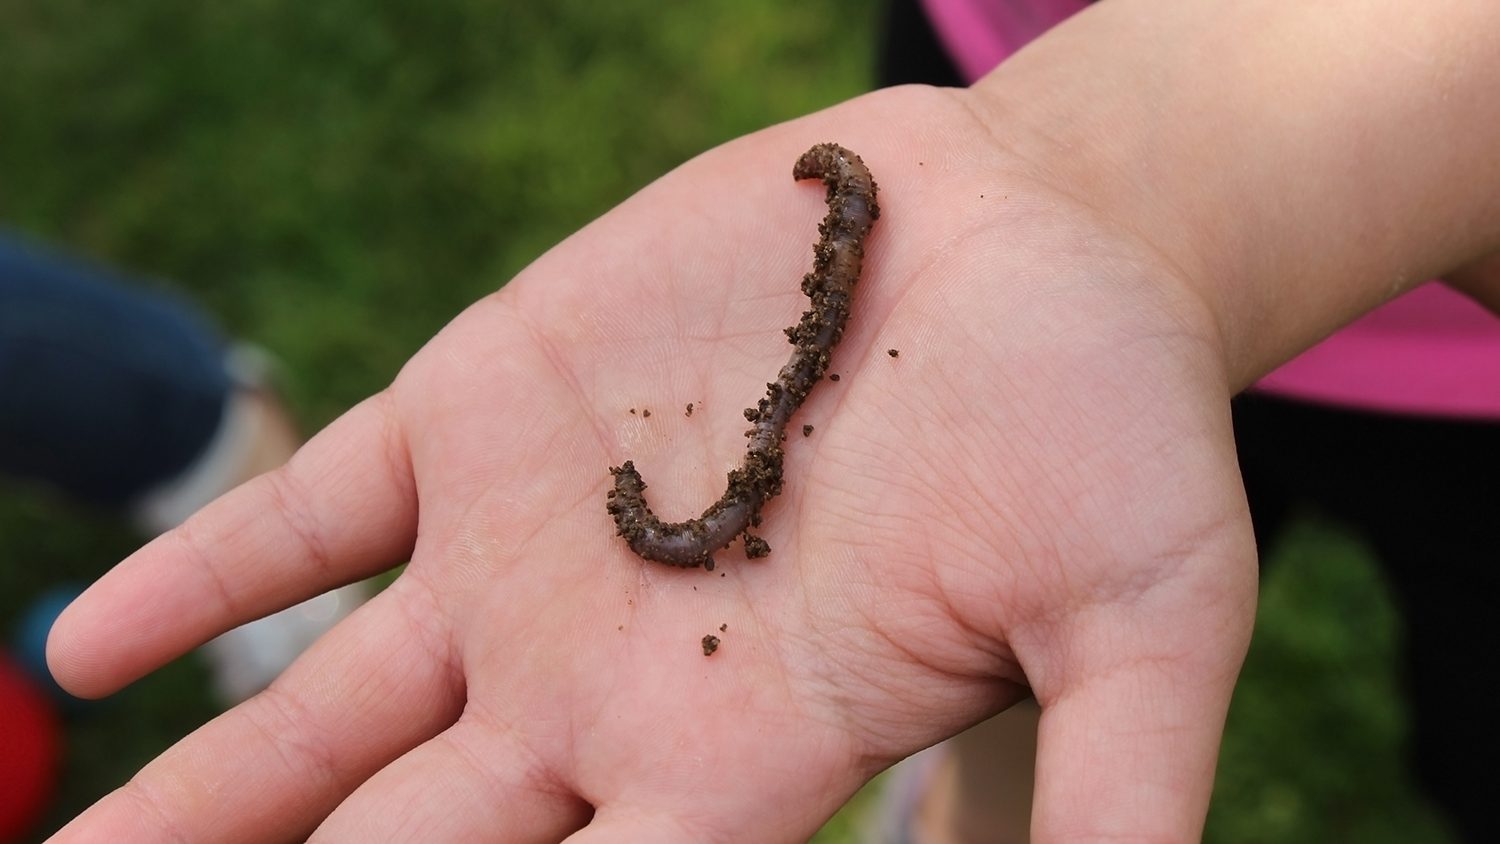 Worm in hand